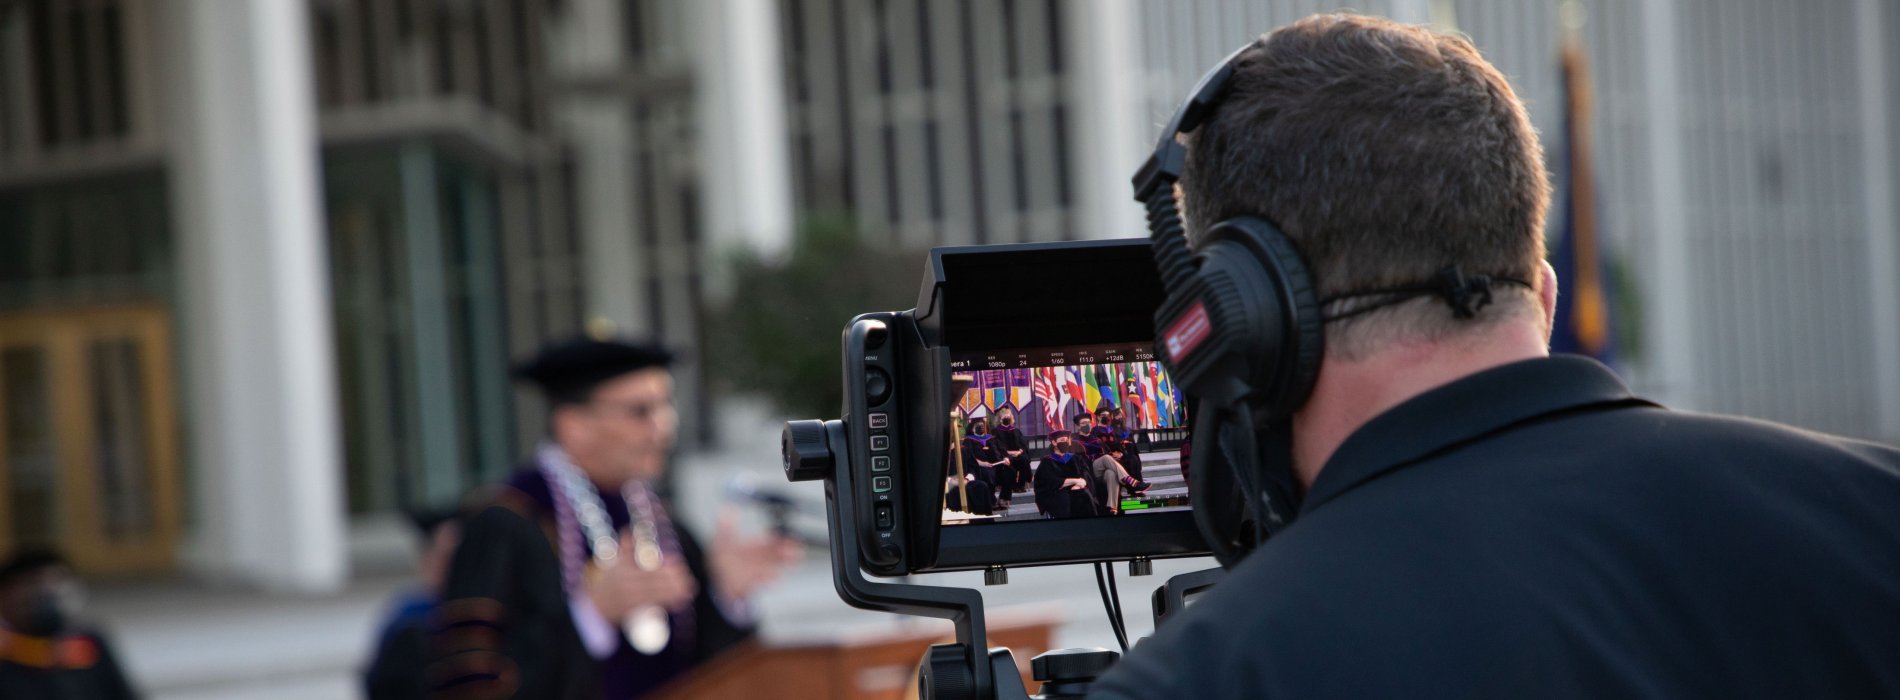 A camera operator wearing headphones looks into a camera display screen as he records Commencement